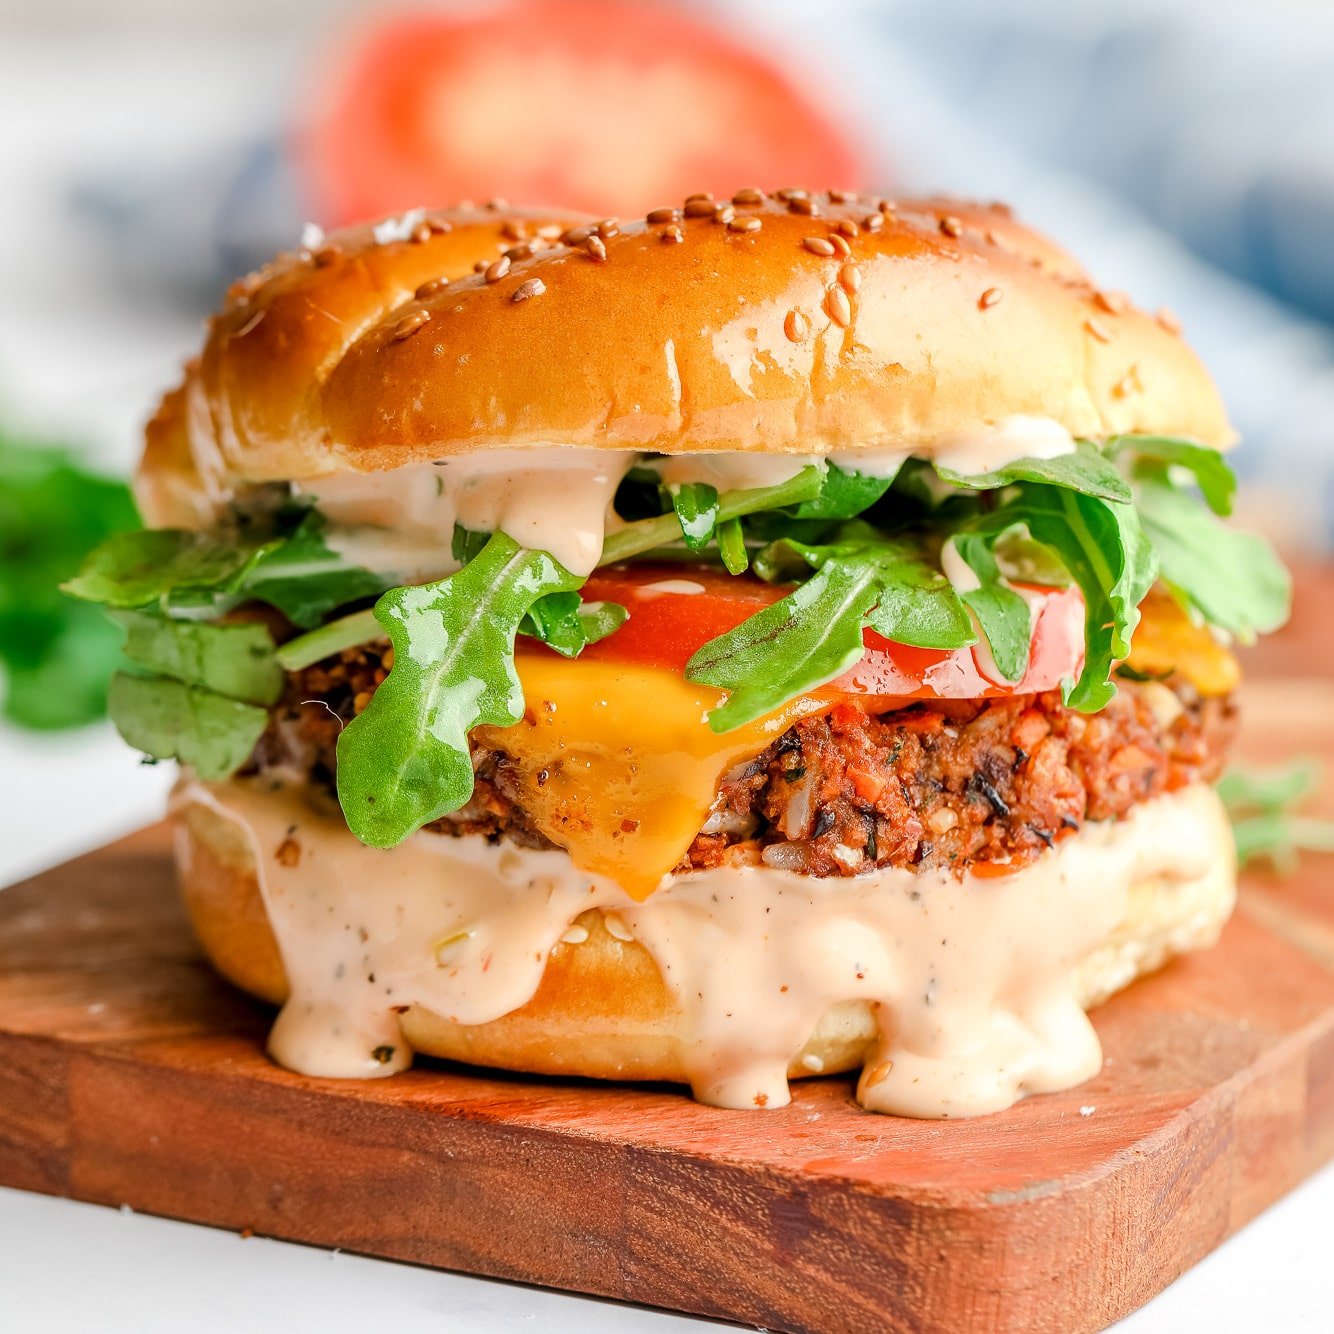 These Are the 9 Best Vegan Burgers for BBQ Grilling